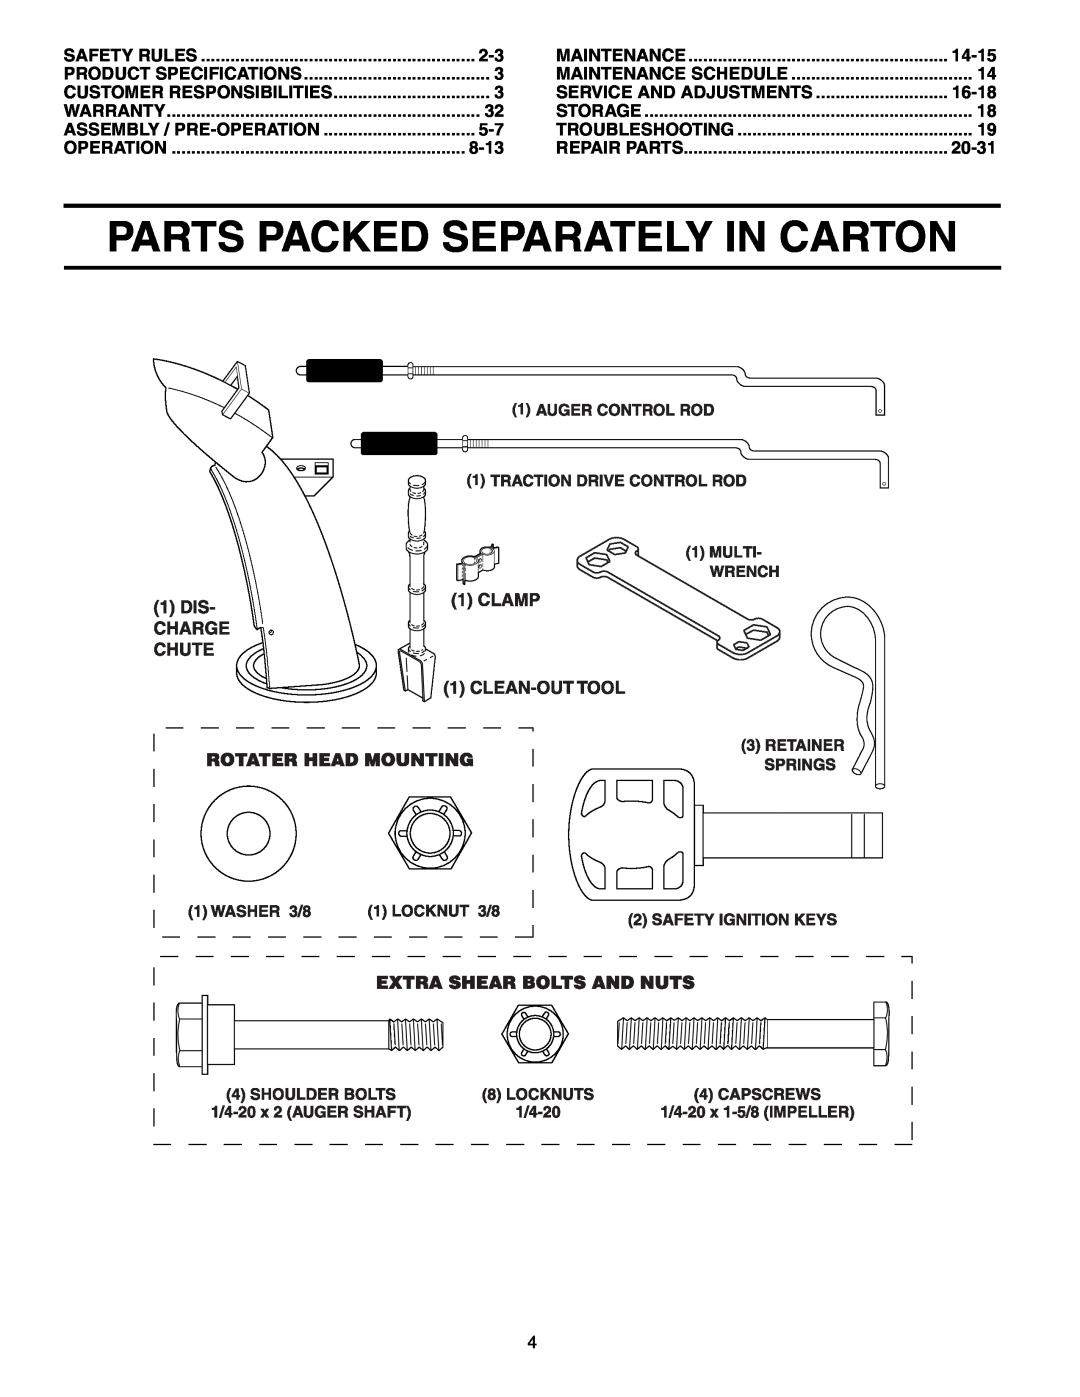 Poulan PP524B Parts Packed Separately In Carton, 8-13, 14-15, Service And Adjustments, 16-18, 20-31, Safety Rules, Storage 